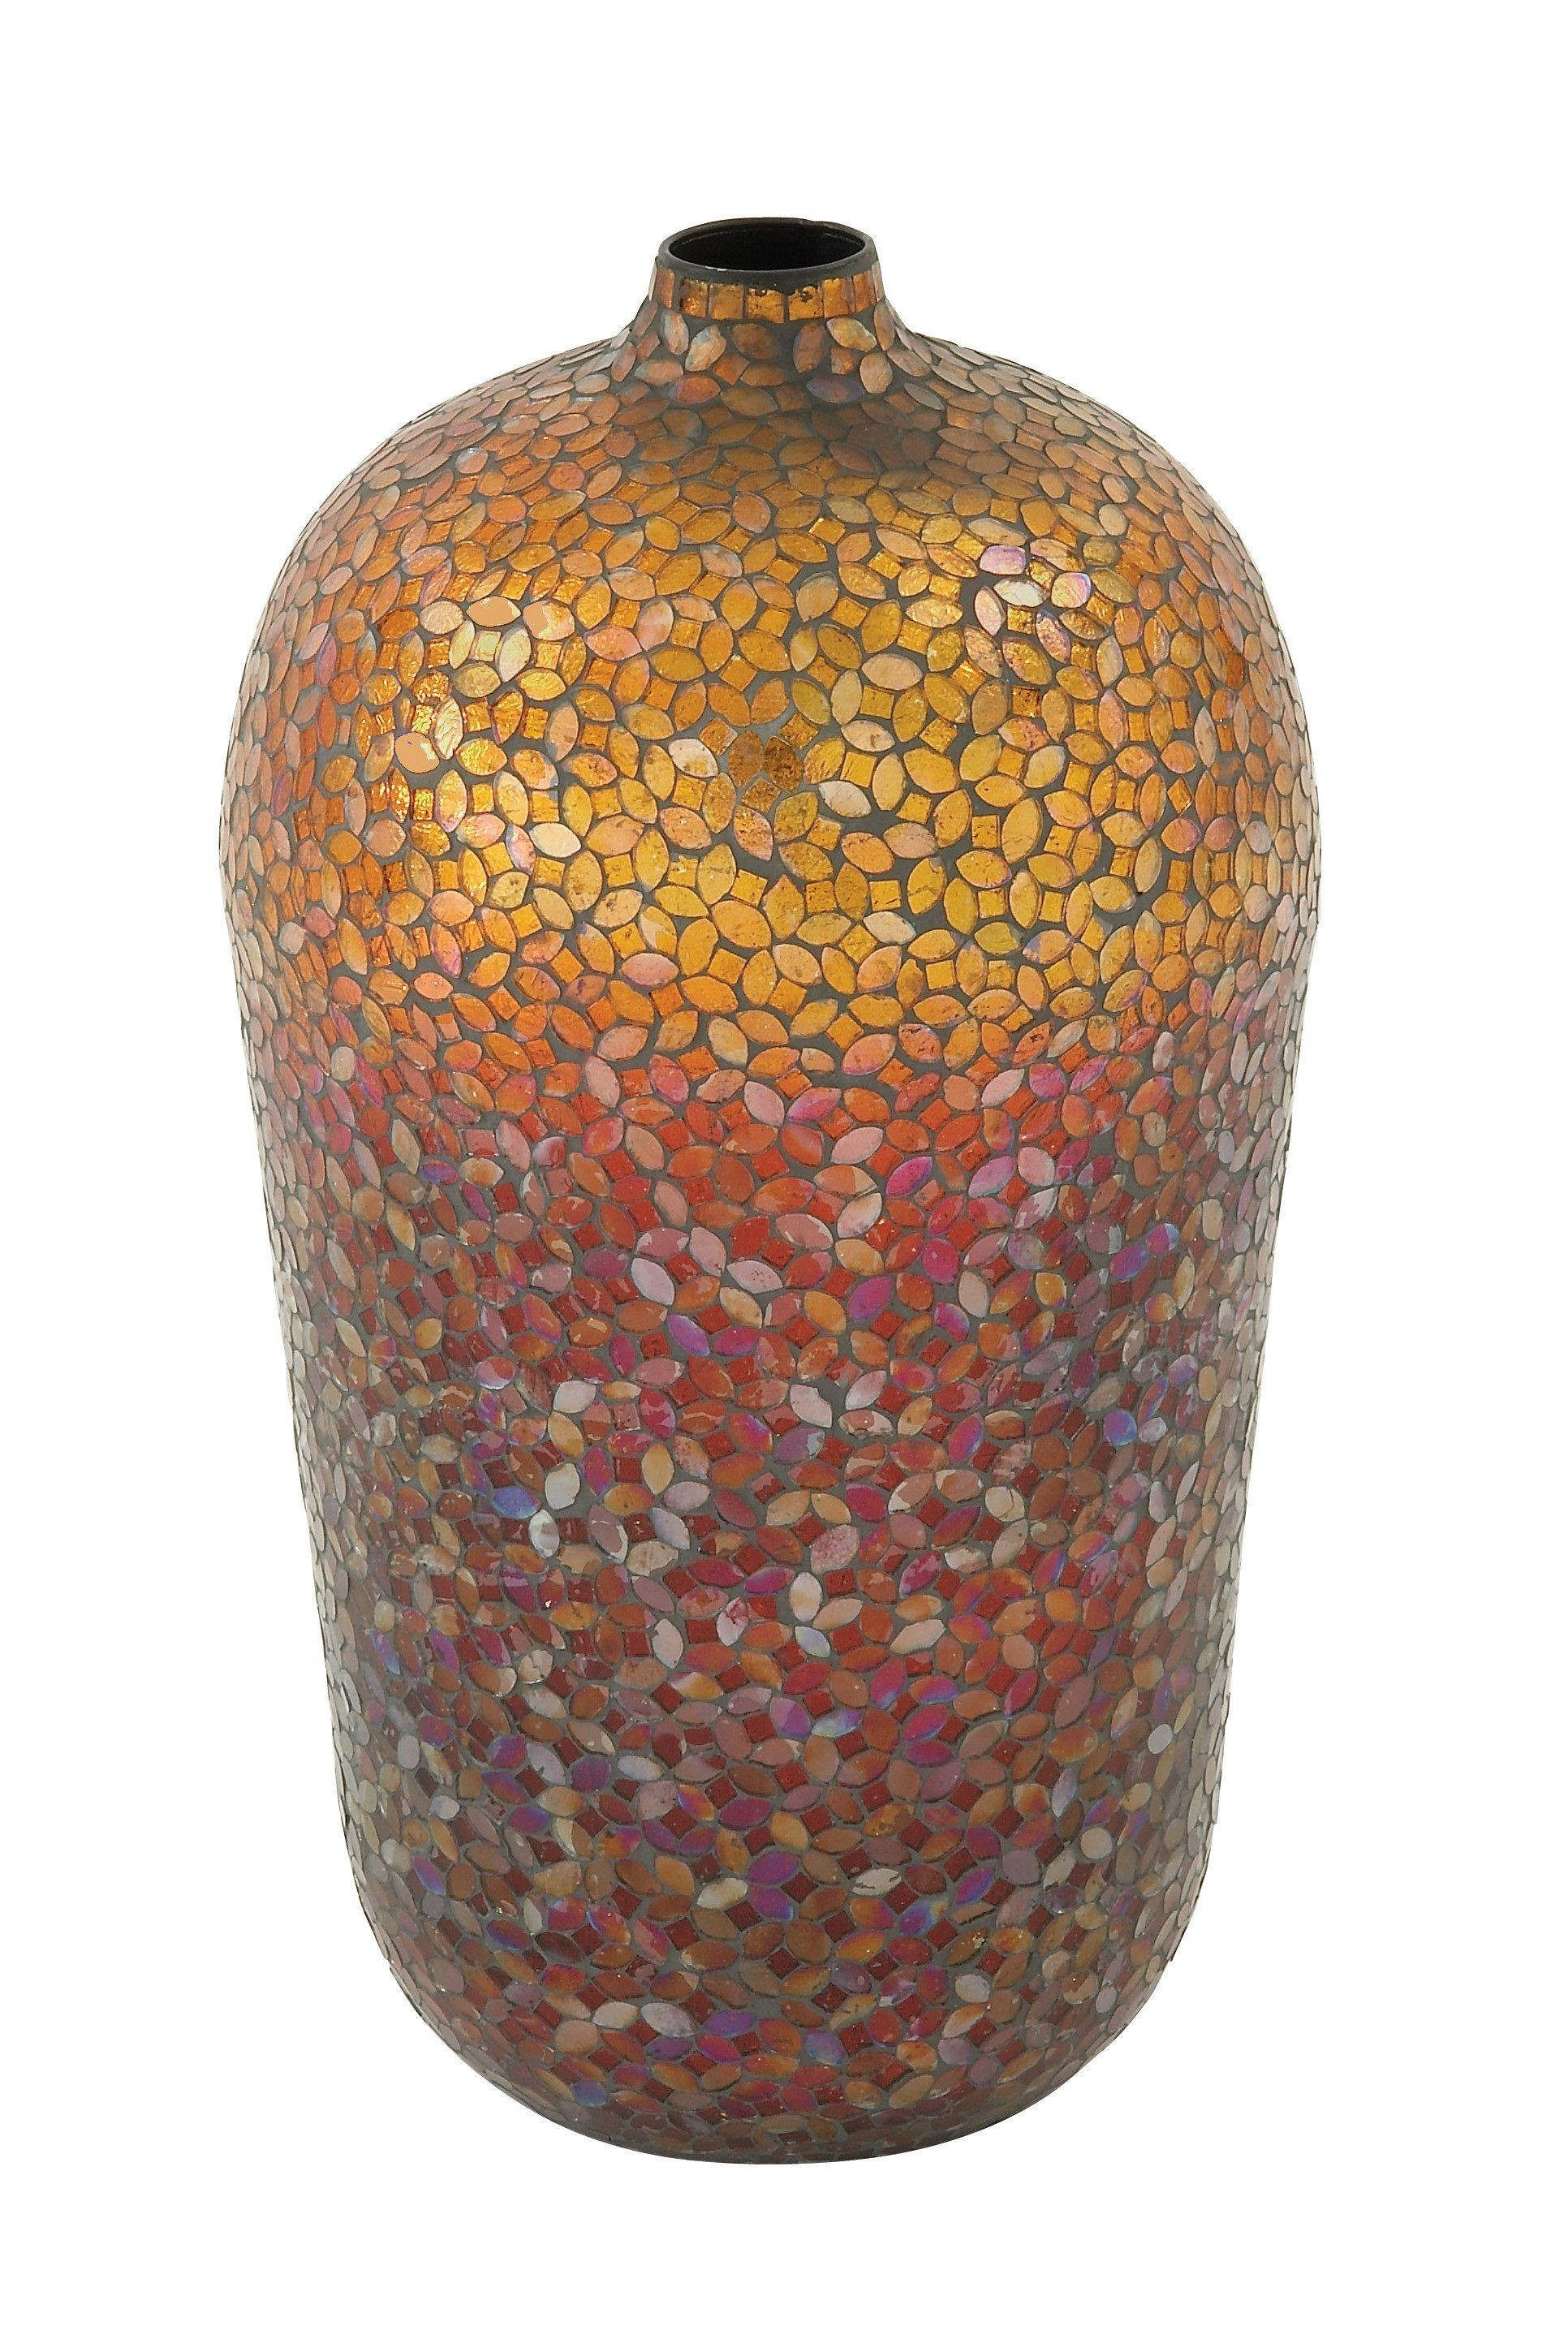 22 Ideal wholesale Pottery Vases 2024 free download wholesale pottery vases of sassy metal mosaic vase products pinterest products within sassy metal mosaic vase